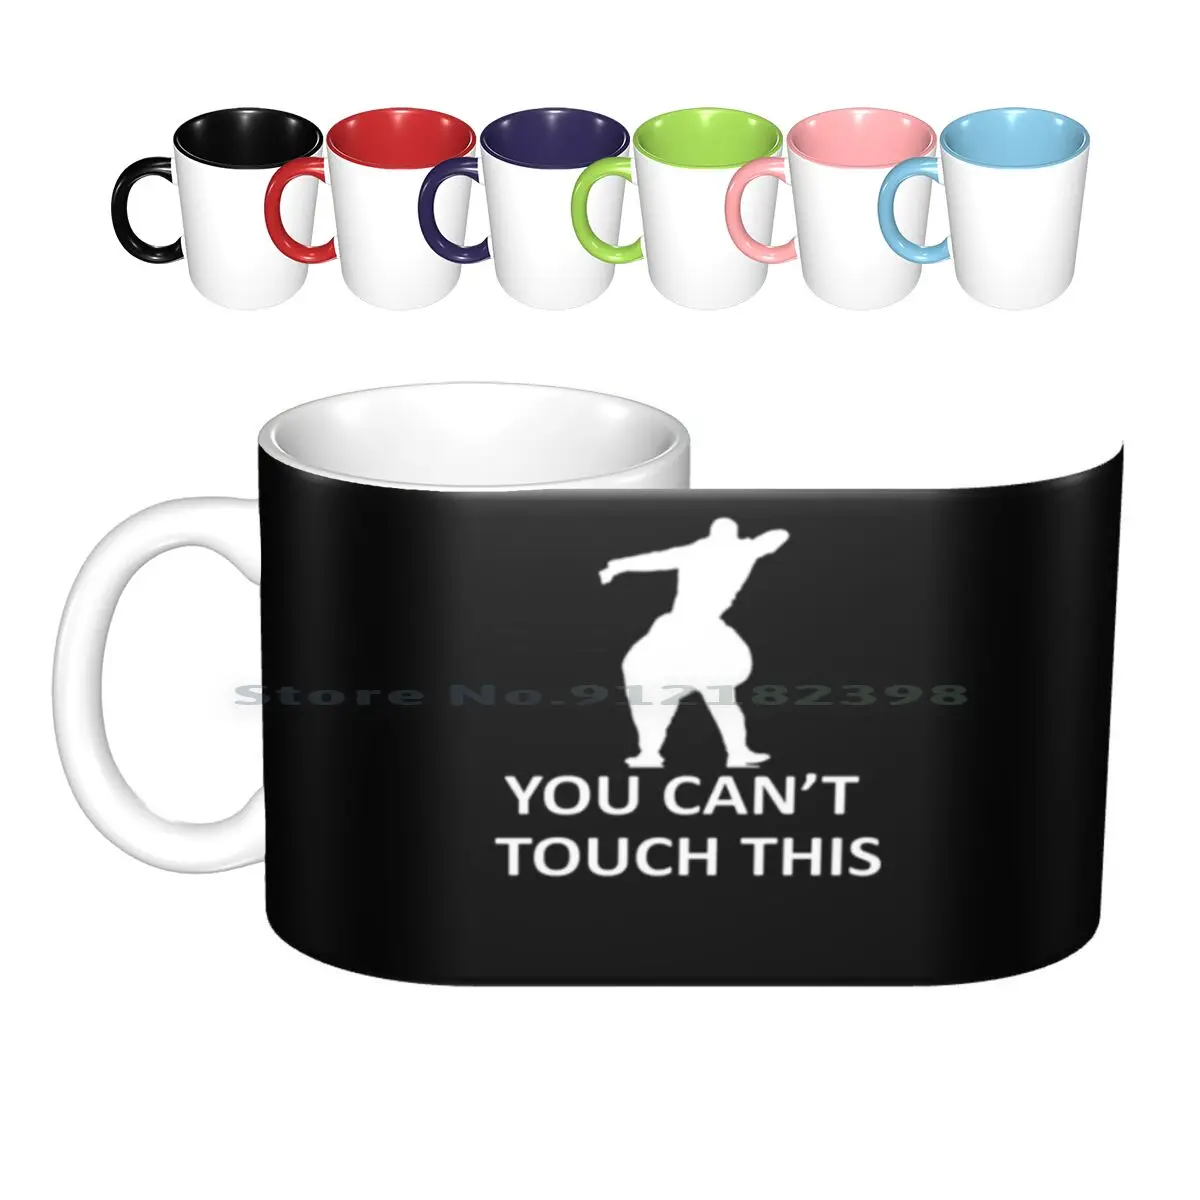 

You Cant Touch This Color Ceramic Mugs Coffee Cups Milk Tea Mug You Cant Touch This White Music Retro Creative Trending Vintage